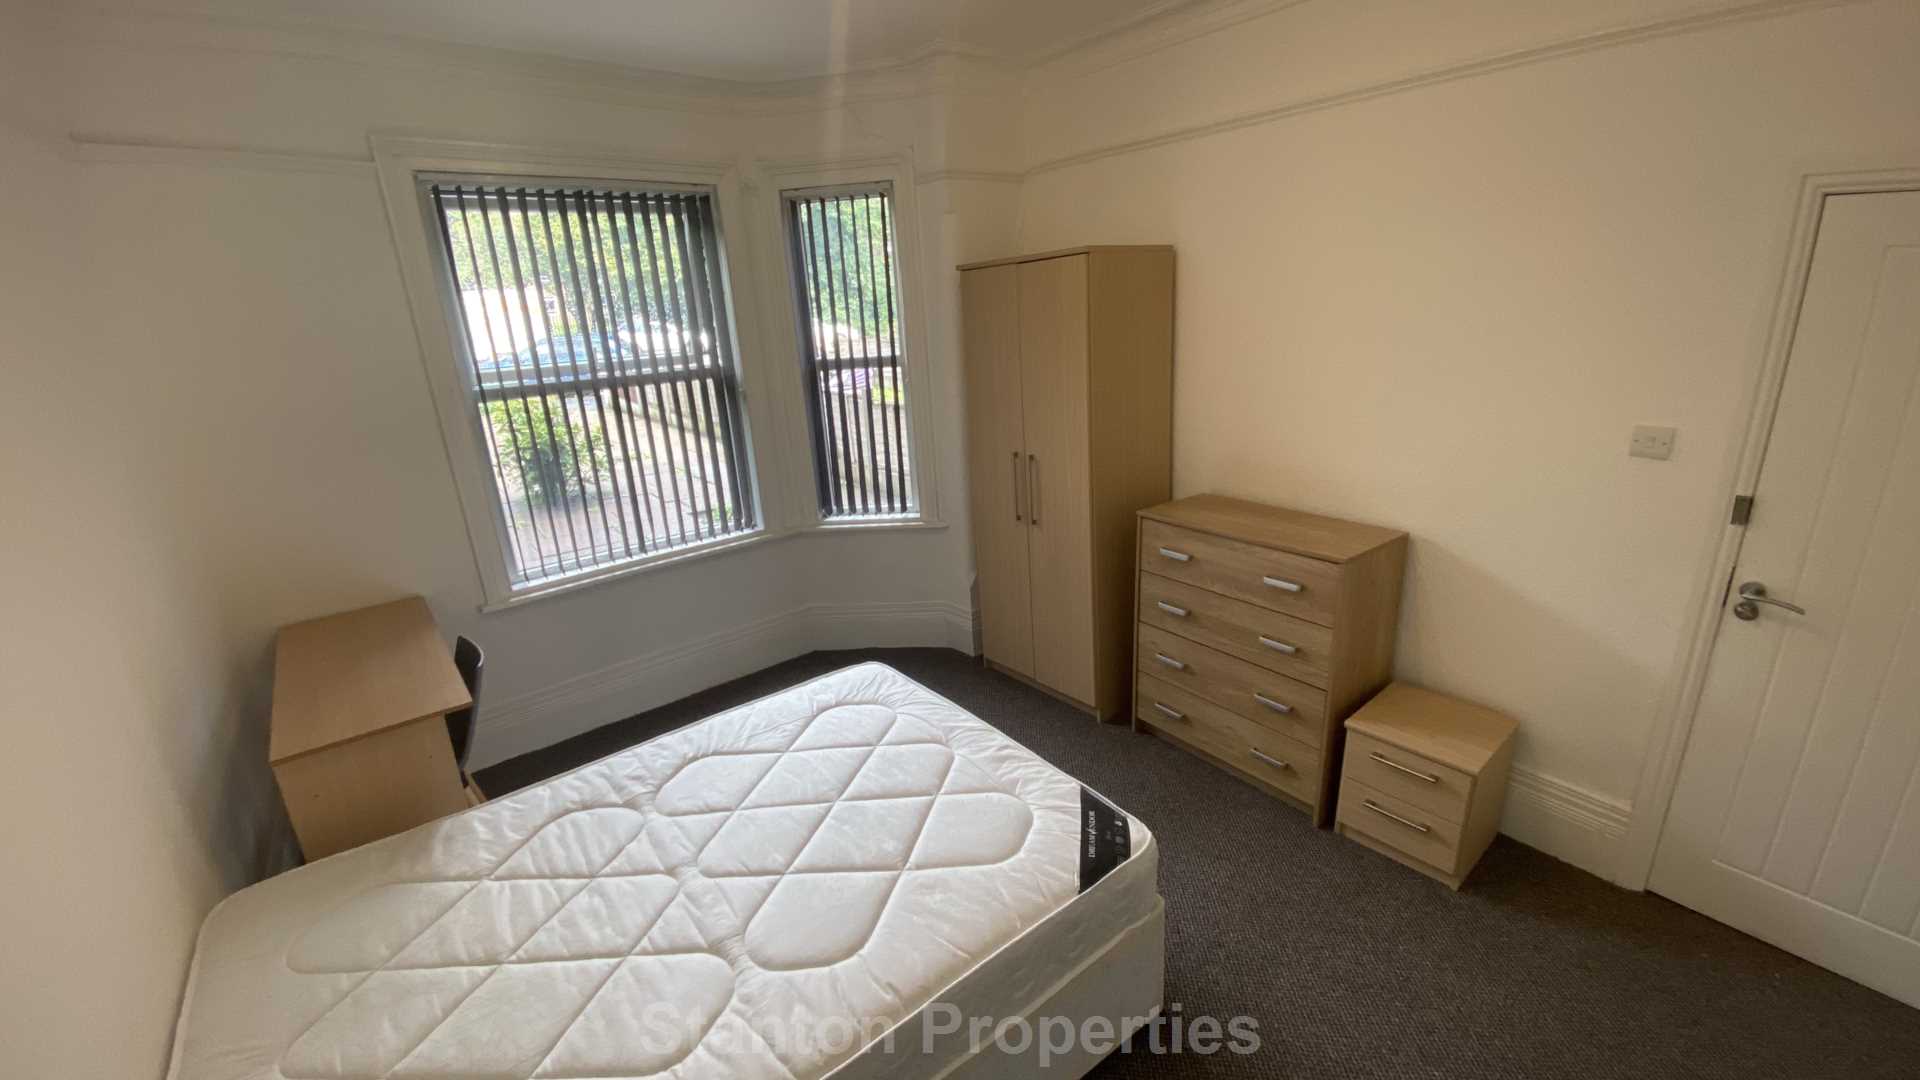 £130 pppw, Moseley Road, Fallowfield, M14 6NR, Image 12